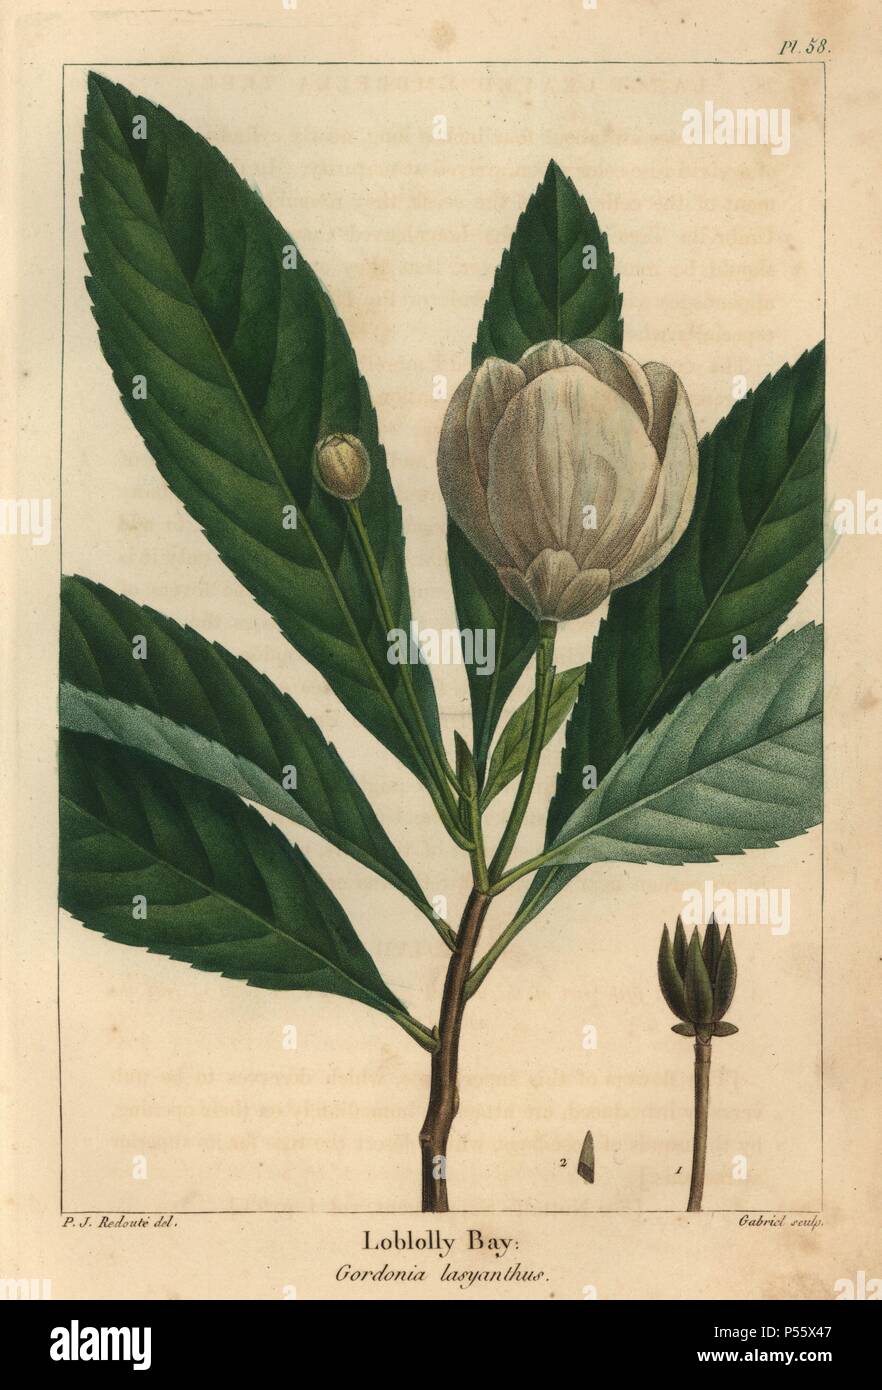 Flower, bud and leaves of the loblolly bay tree, Gordonia lasyanthus. Handcolored stipple engraving from a botanical illustration by Pierre Joseph Redoute, engraved on copper by Gabriel, from Francois Andre Michaux's 'North American Sylva,' Philadelphia, 1857. French botanist Michaux (1770-1855) explored America and Canada in 1785 cataloging its native trees. Stock Photo